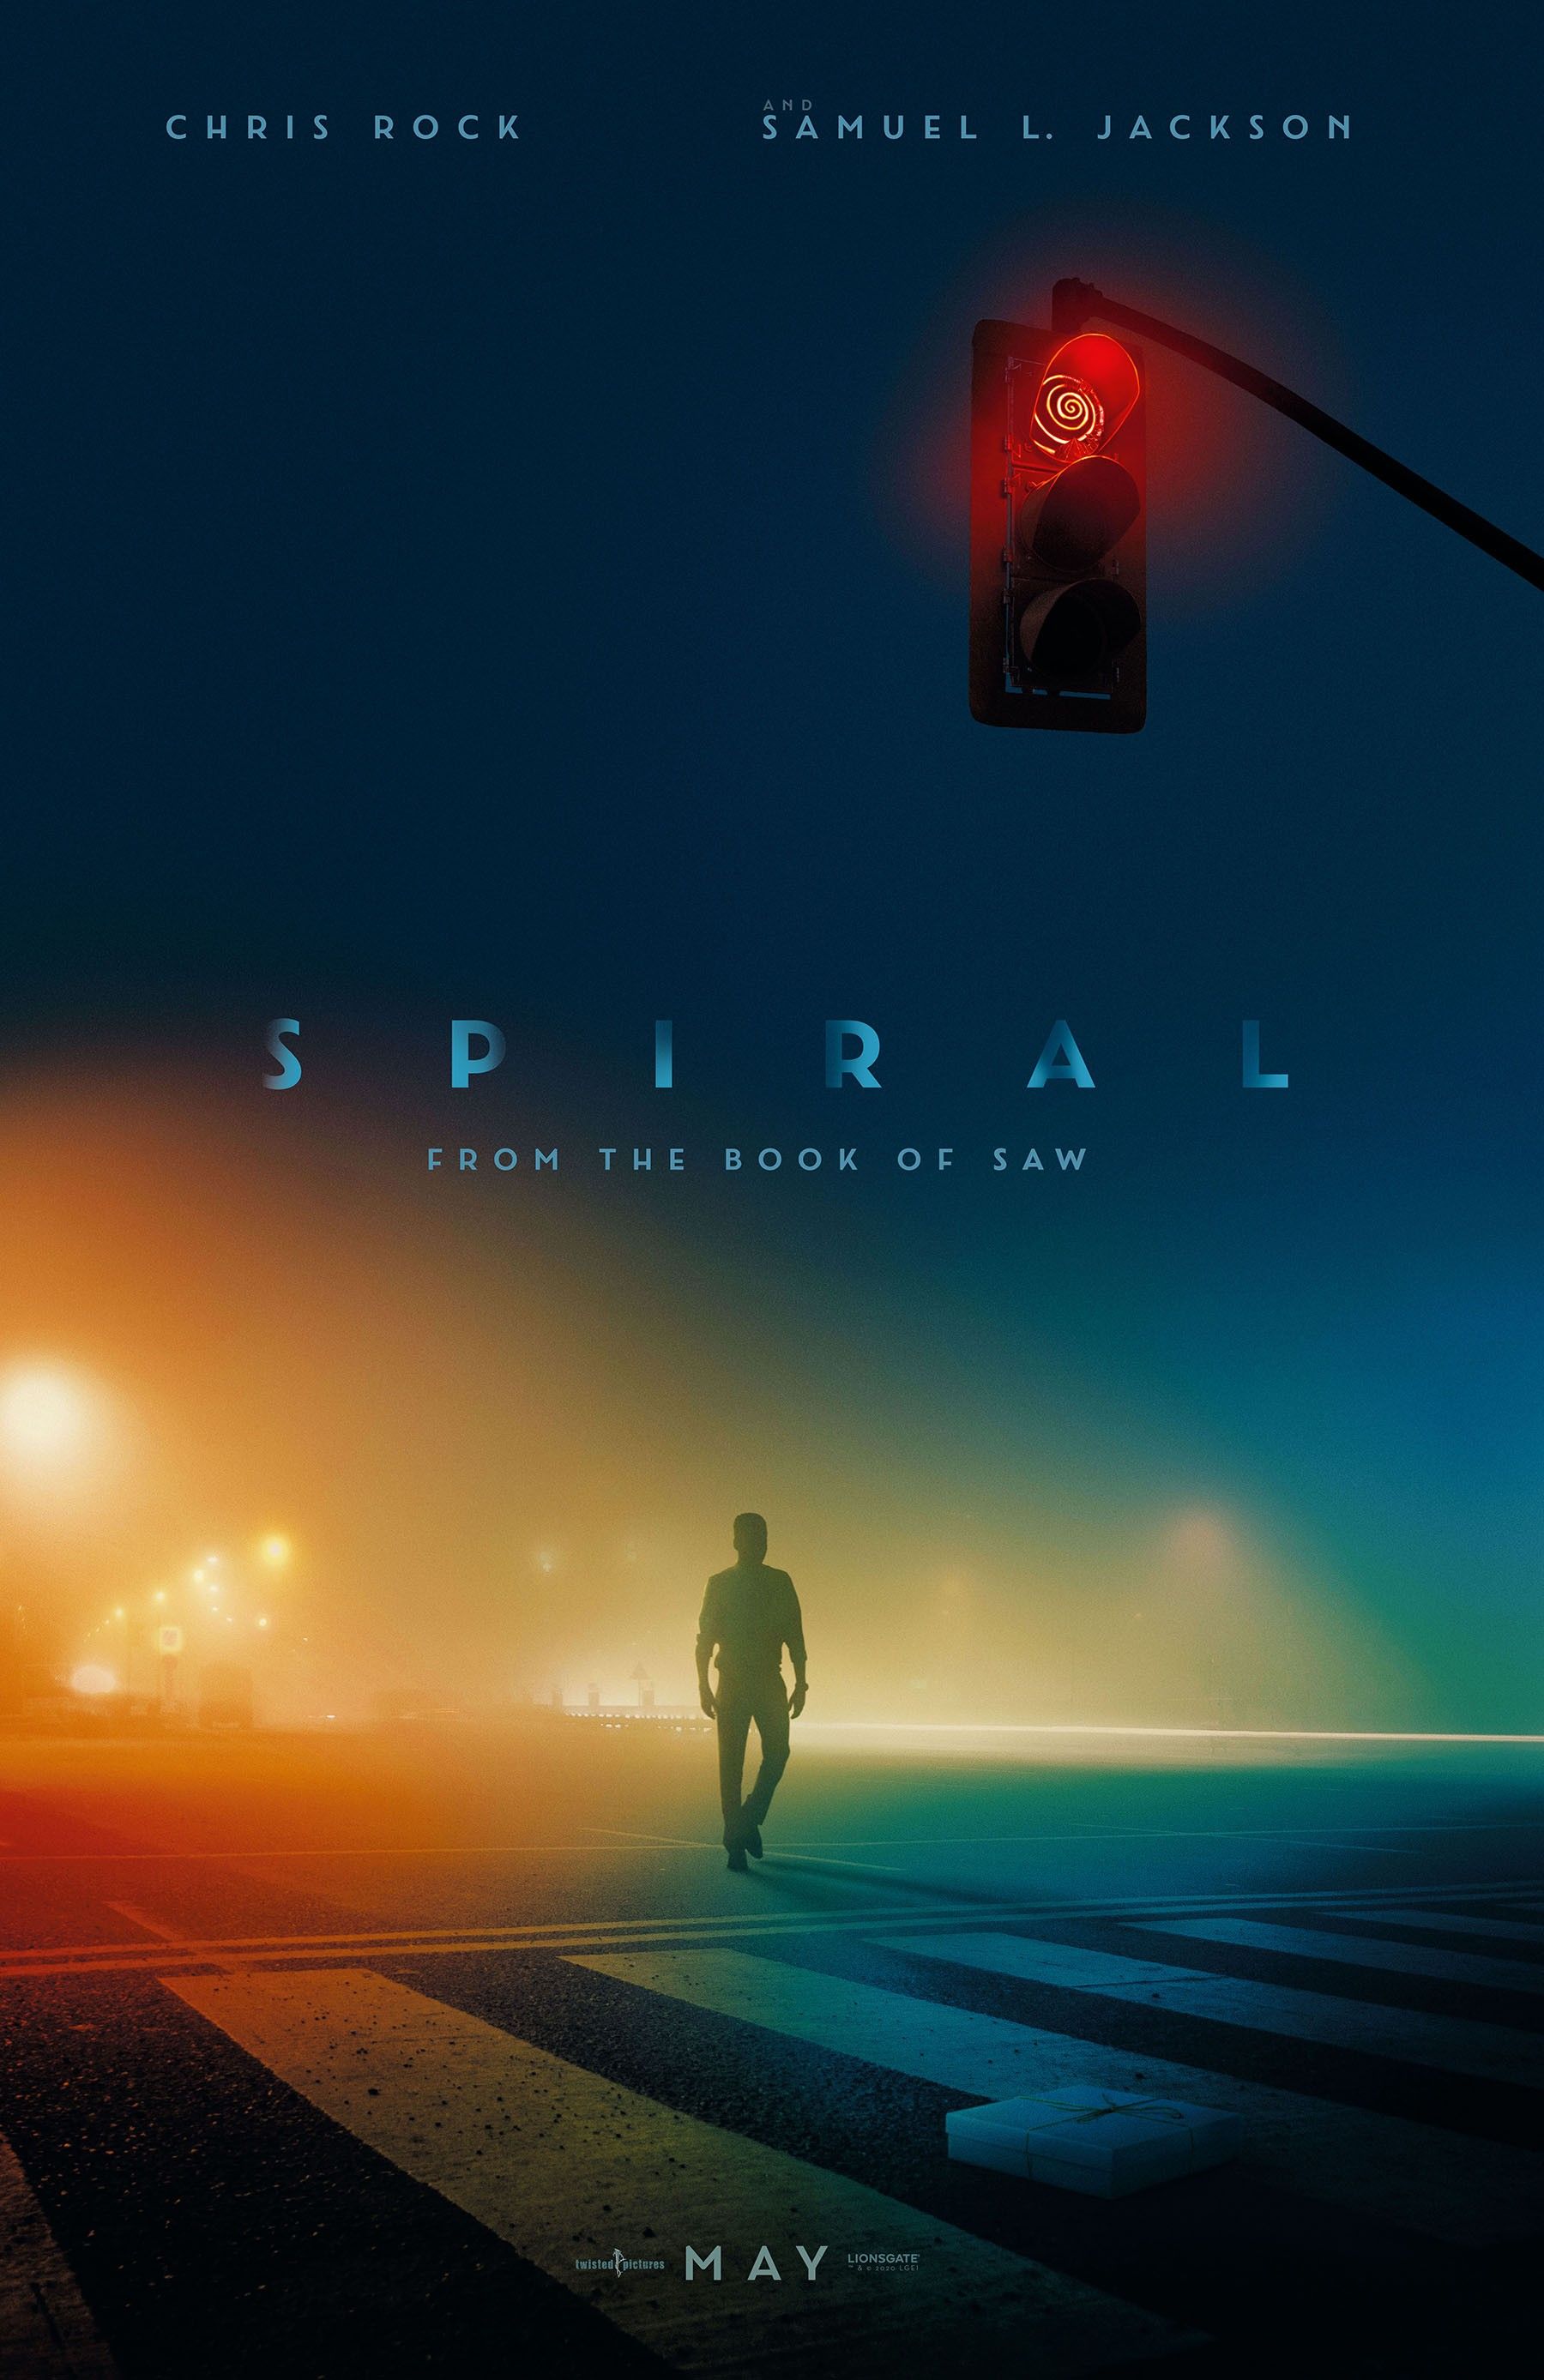 Saw 2 Director Planned To Put John Kramer In Spiral: “I Was Bummed Out”